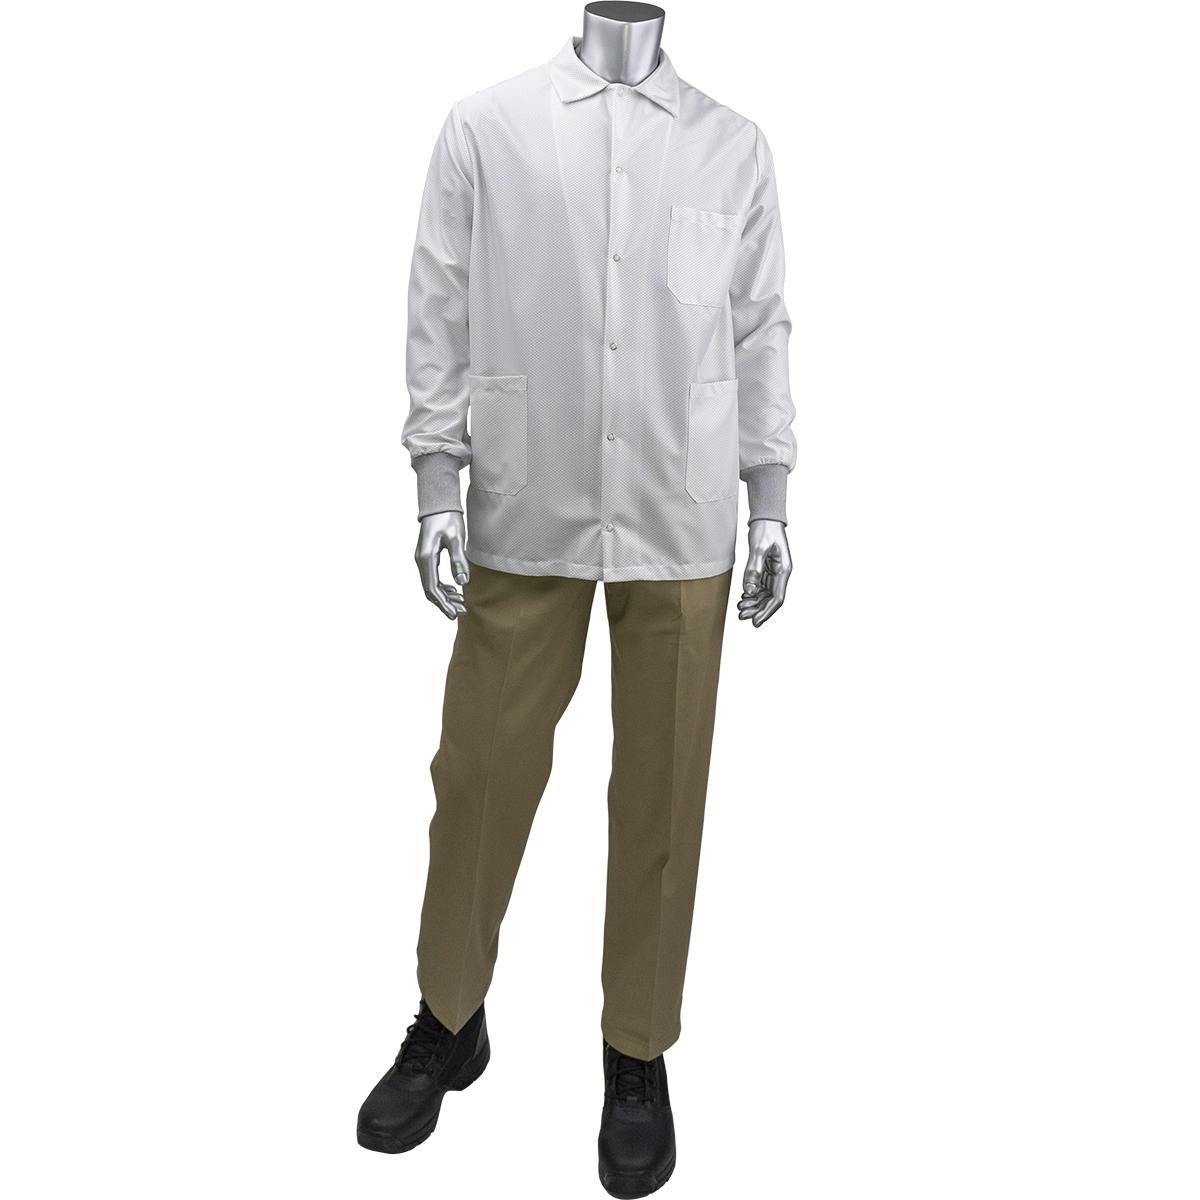 StatMaster Short ESD Labcoat - ESD Knit Cuff, White (BR49AC-47WH)_0